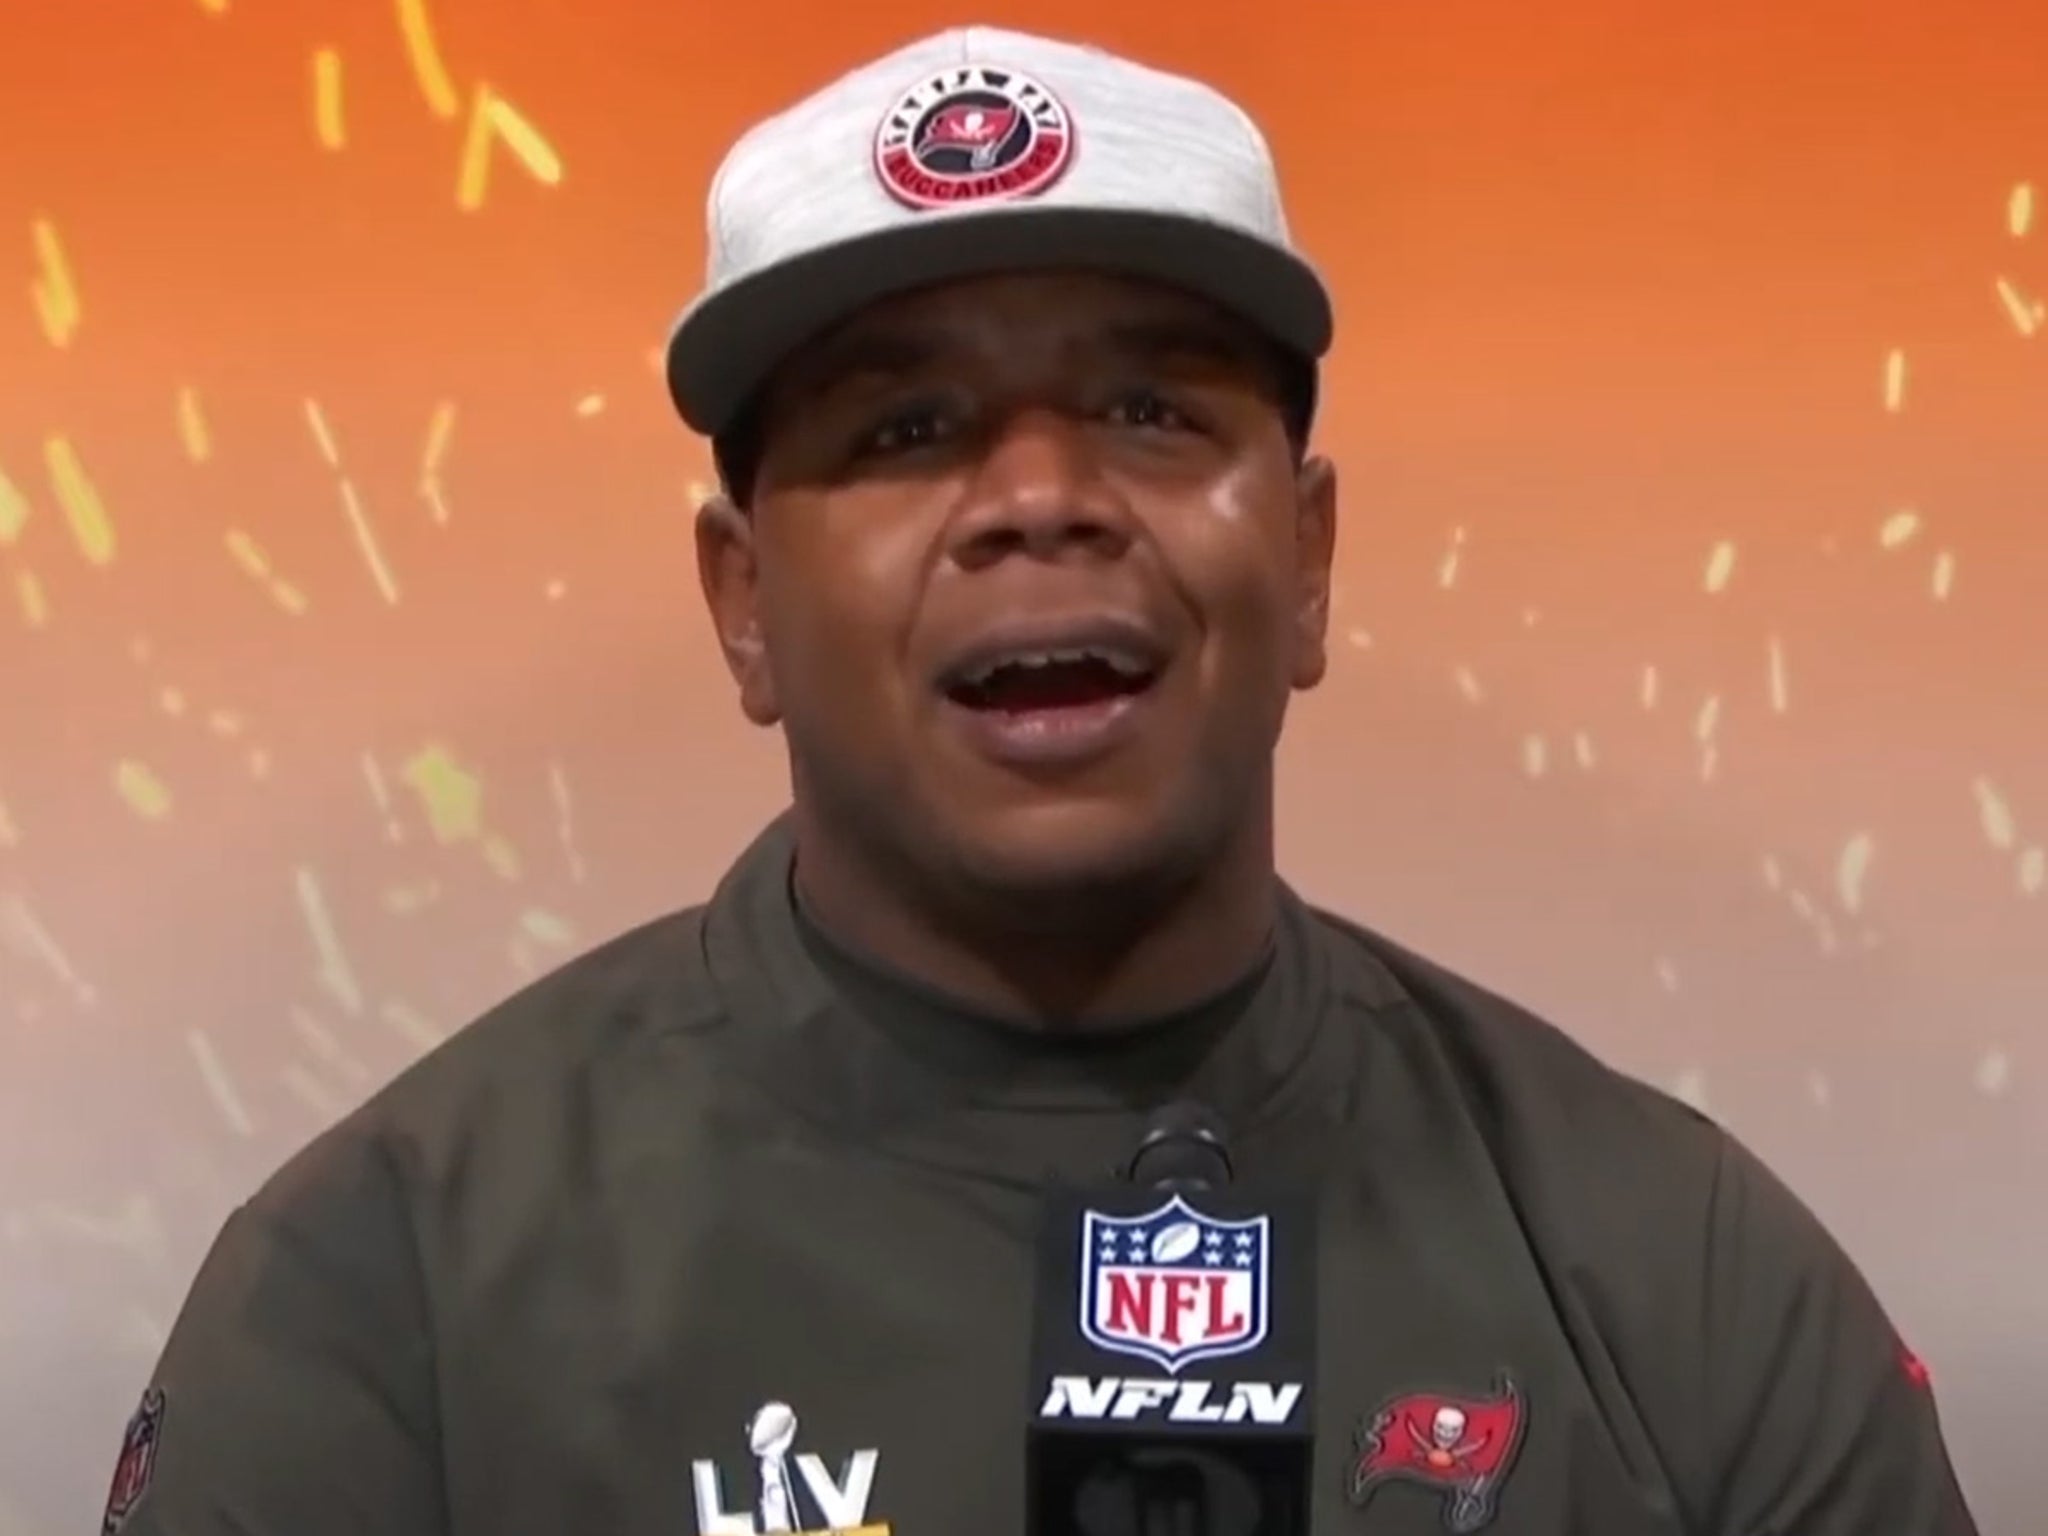 With the Buccaneers, Byron Leftwich is cast as the fall guy